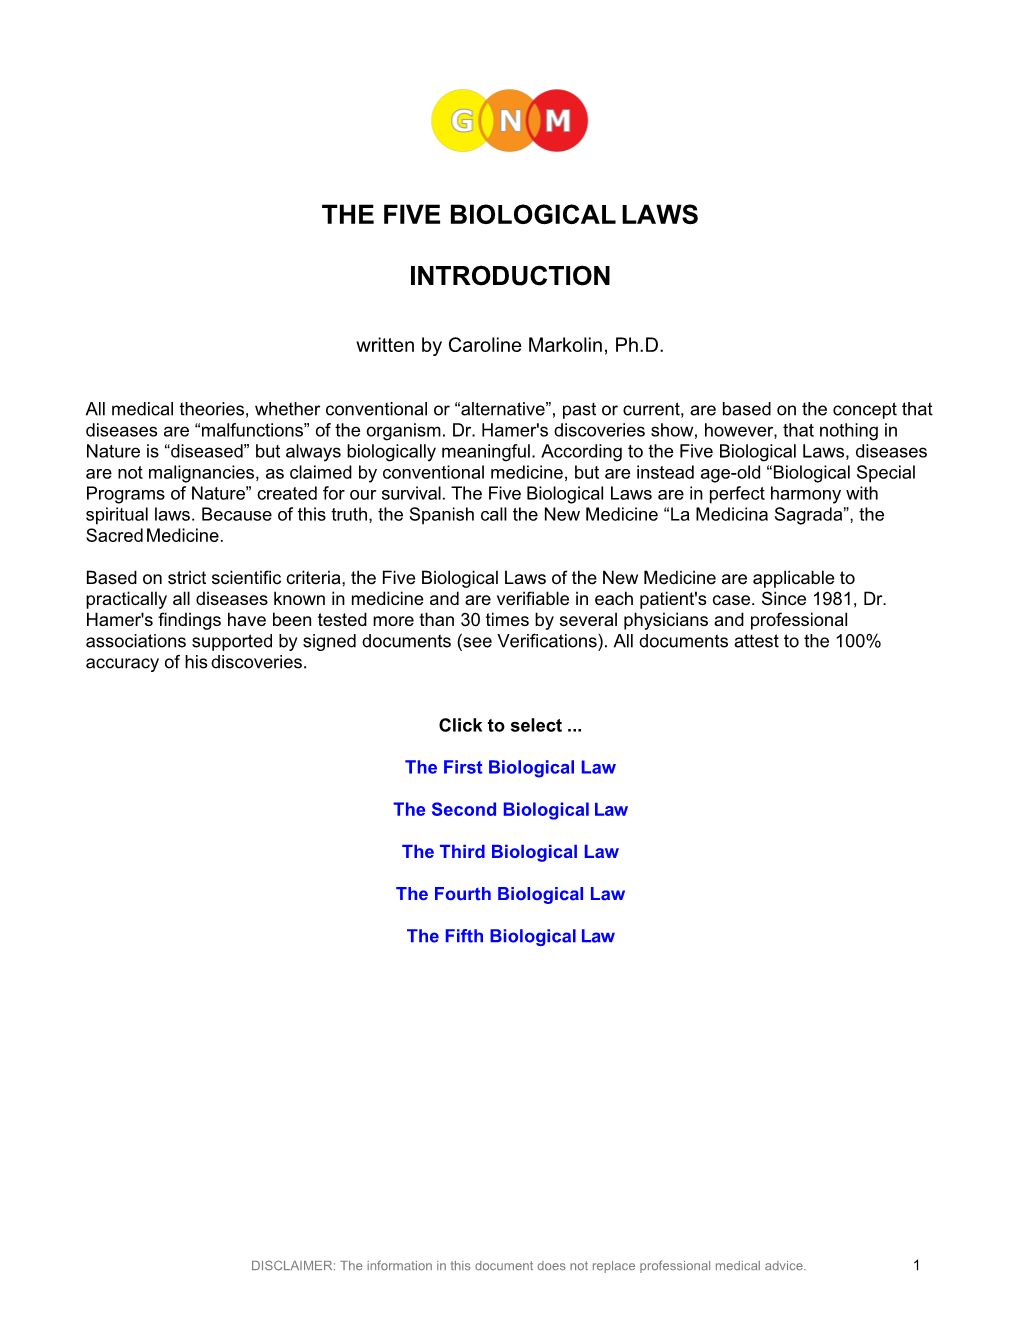 The Five Biological Laws Introduction